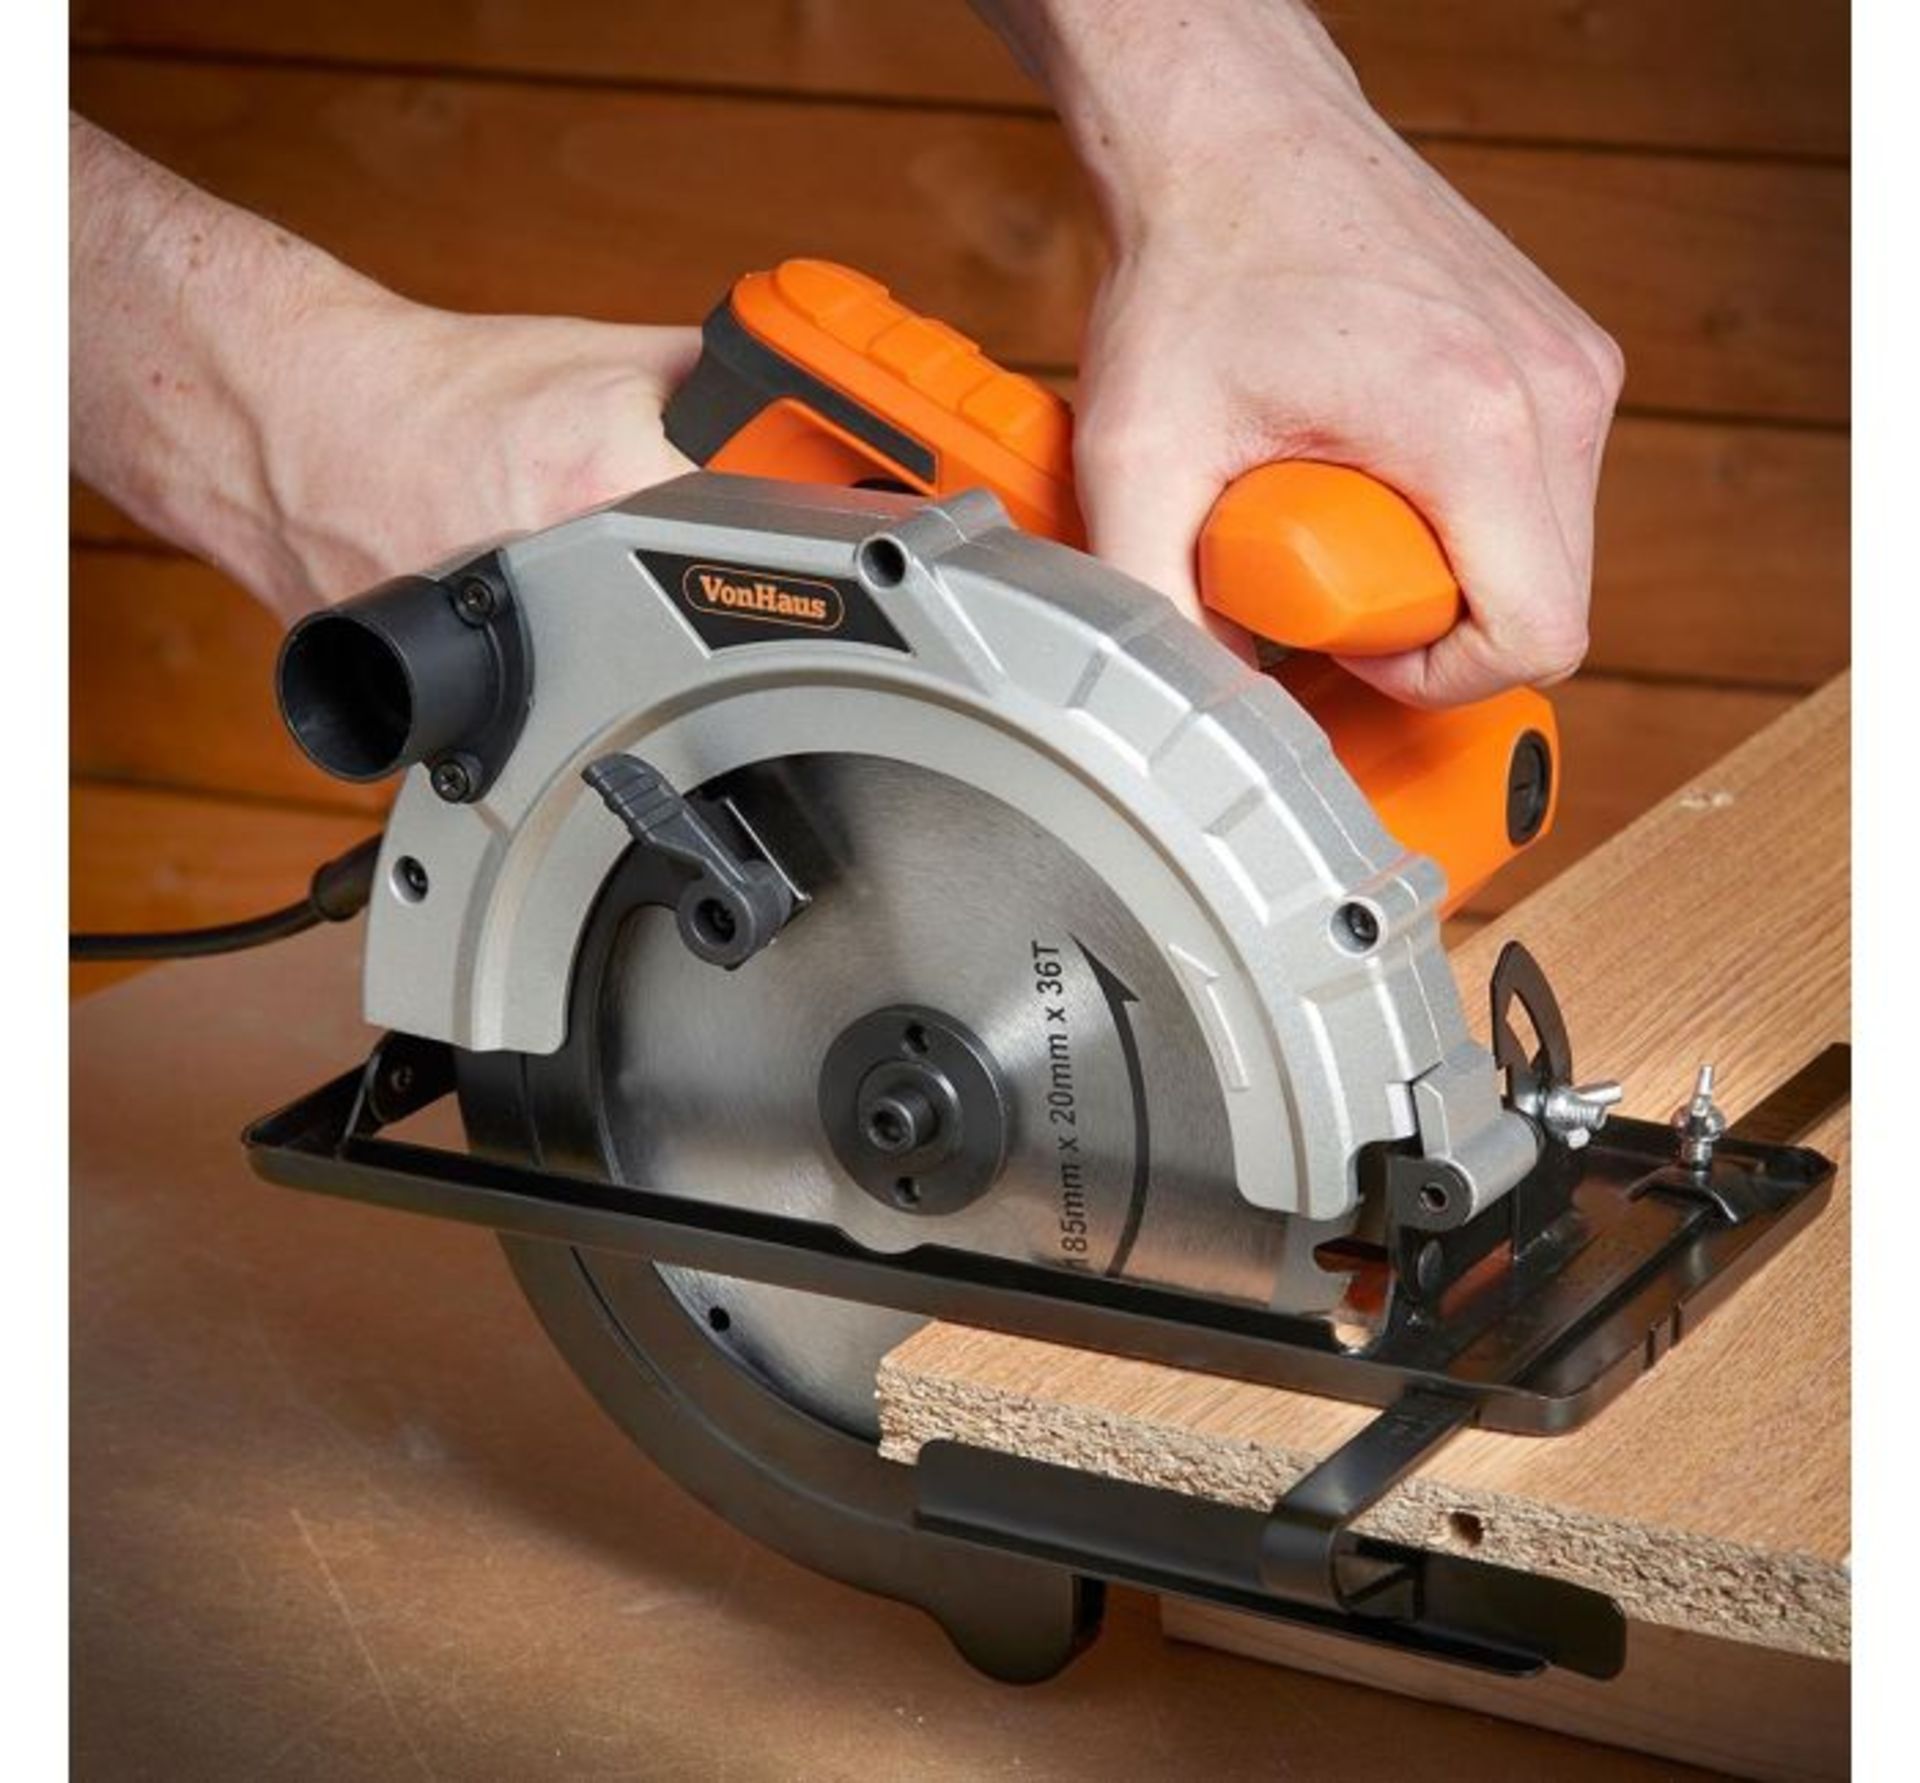 (GE10) 185mm Circular Saw Powerful 1200W input Multiple bevel angle settings for joint cuts ... - Image 2 of 3